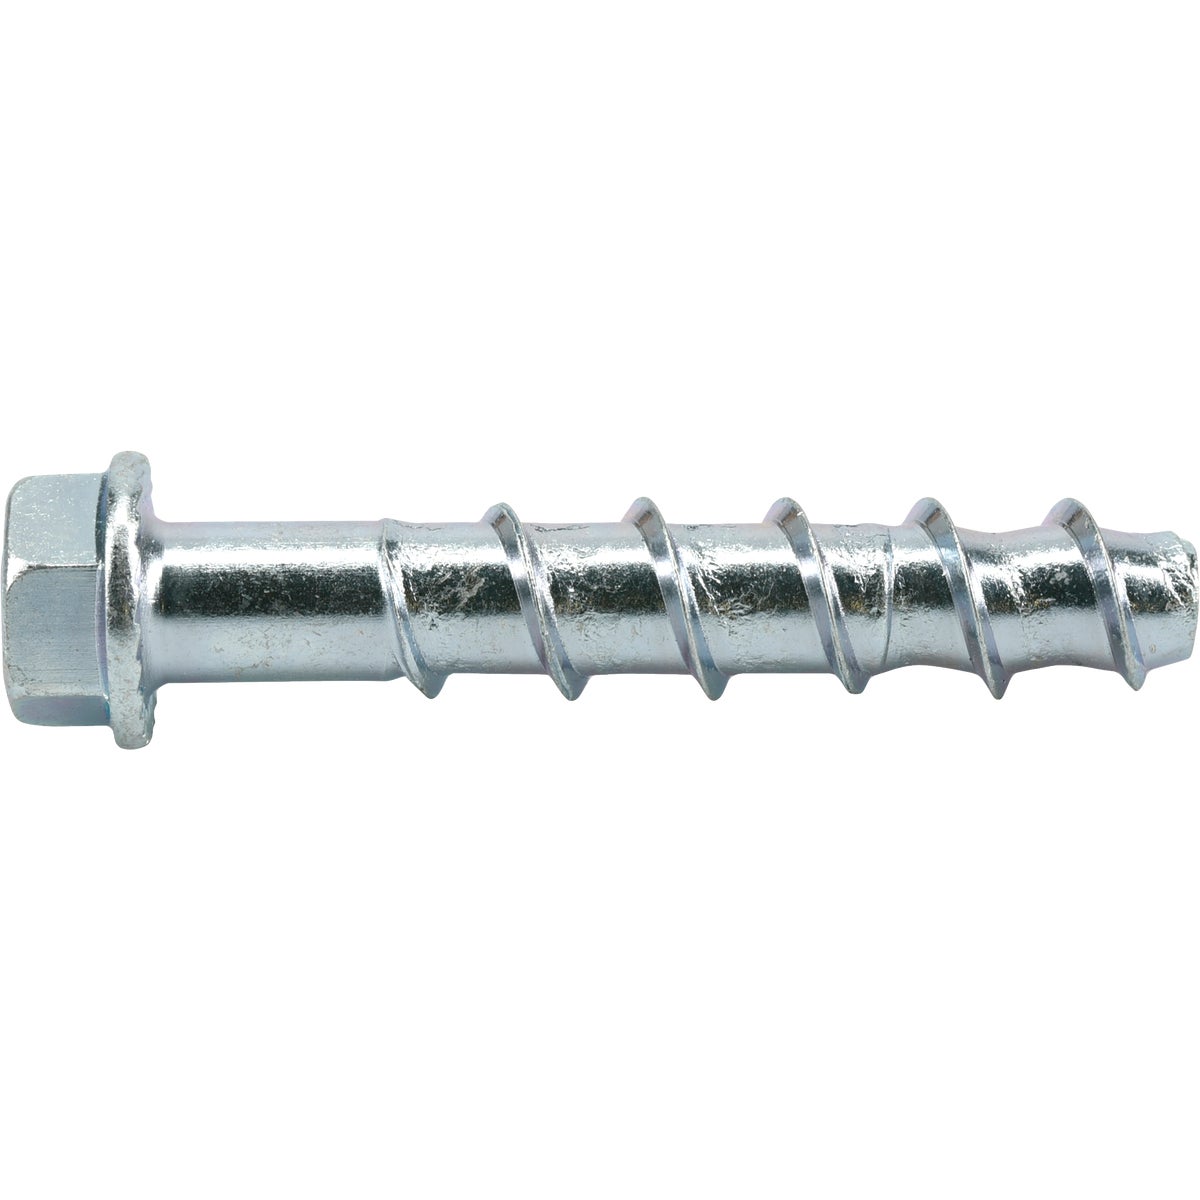 Hillman Screw-Bolt+ 3/8 In. x 2-1/2 In. Masonry and Concrete Anchor (15-Count)